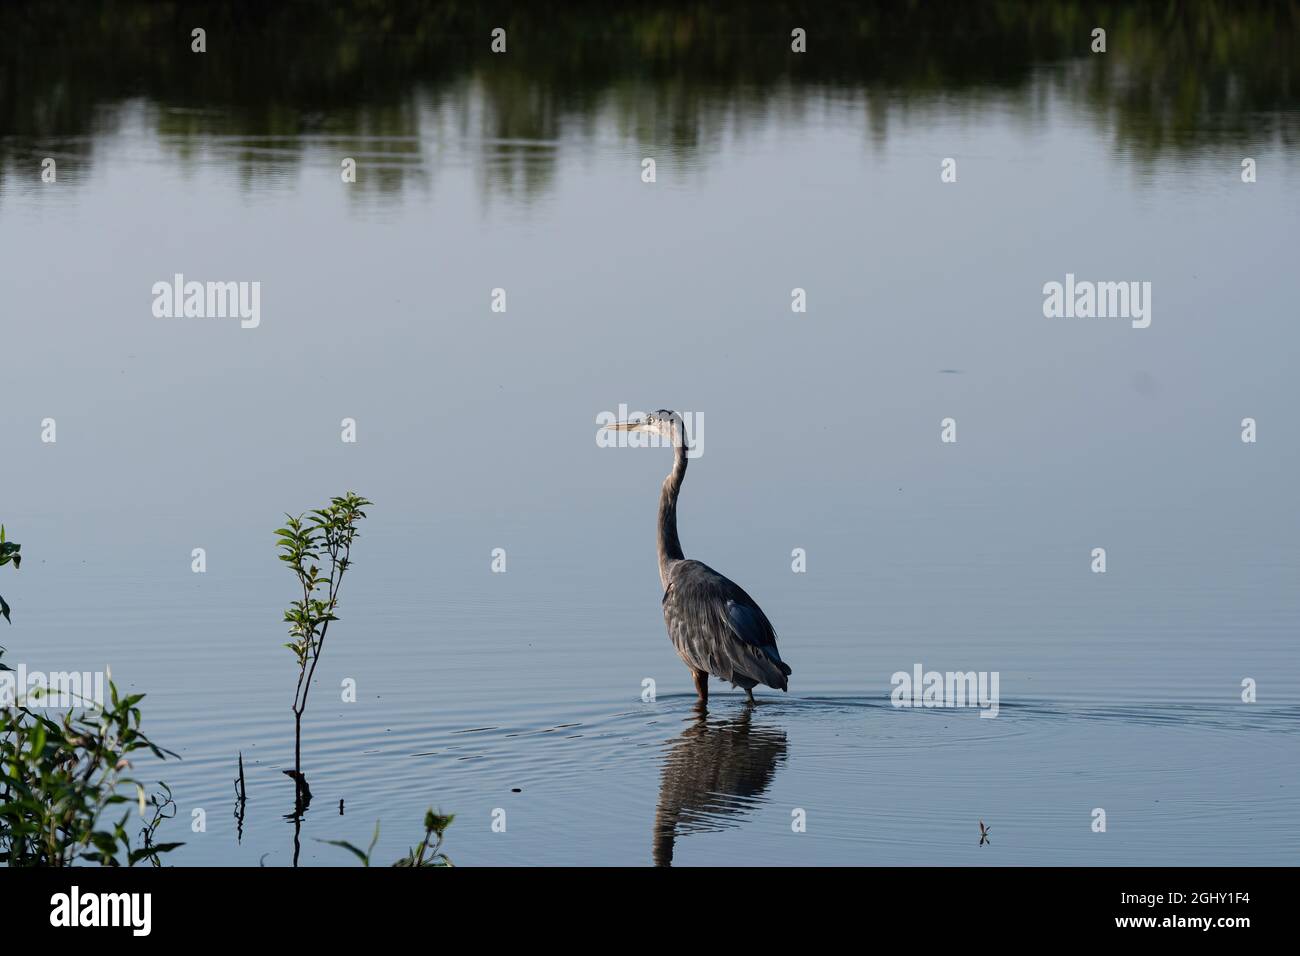 A Great Blue Heron wading out into the shallow water near the shore of a lake as it hunts for food on a sunny morning. Stock Photo